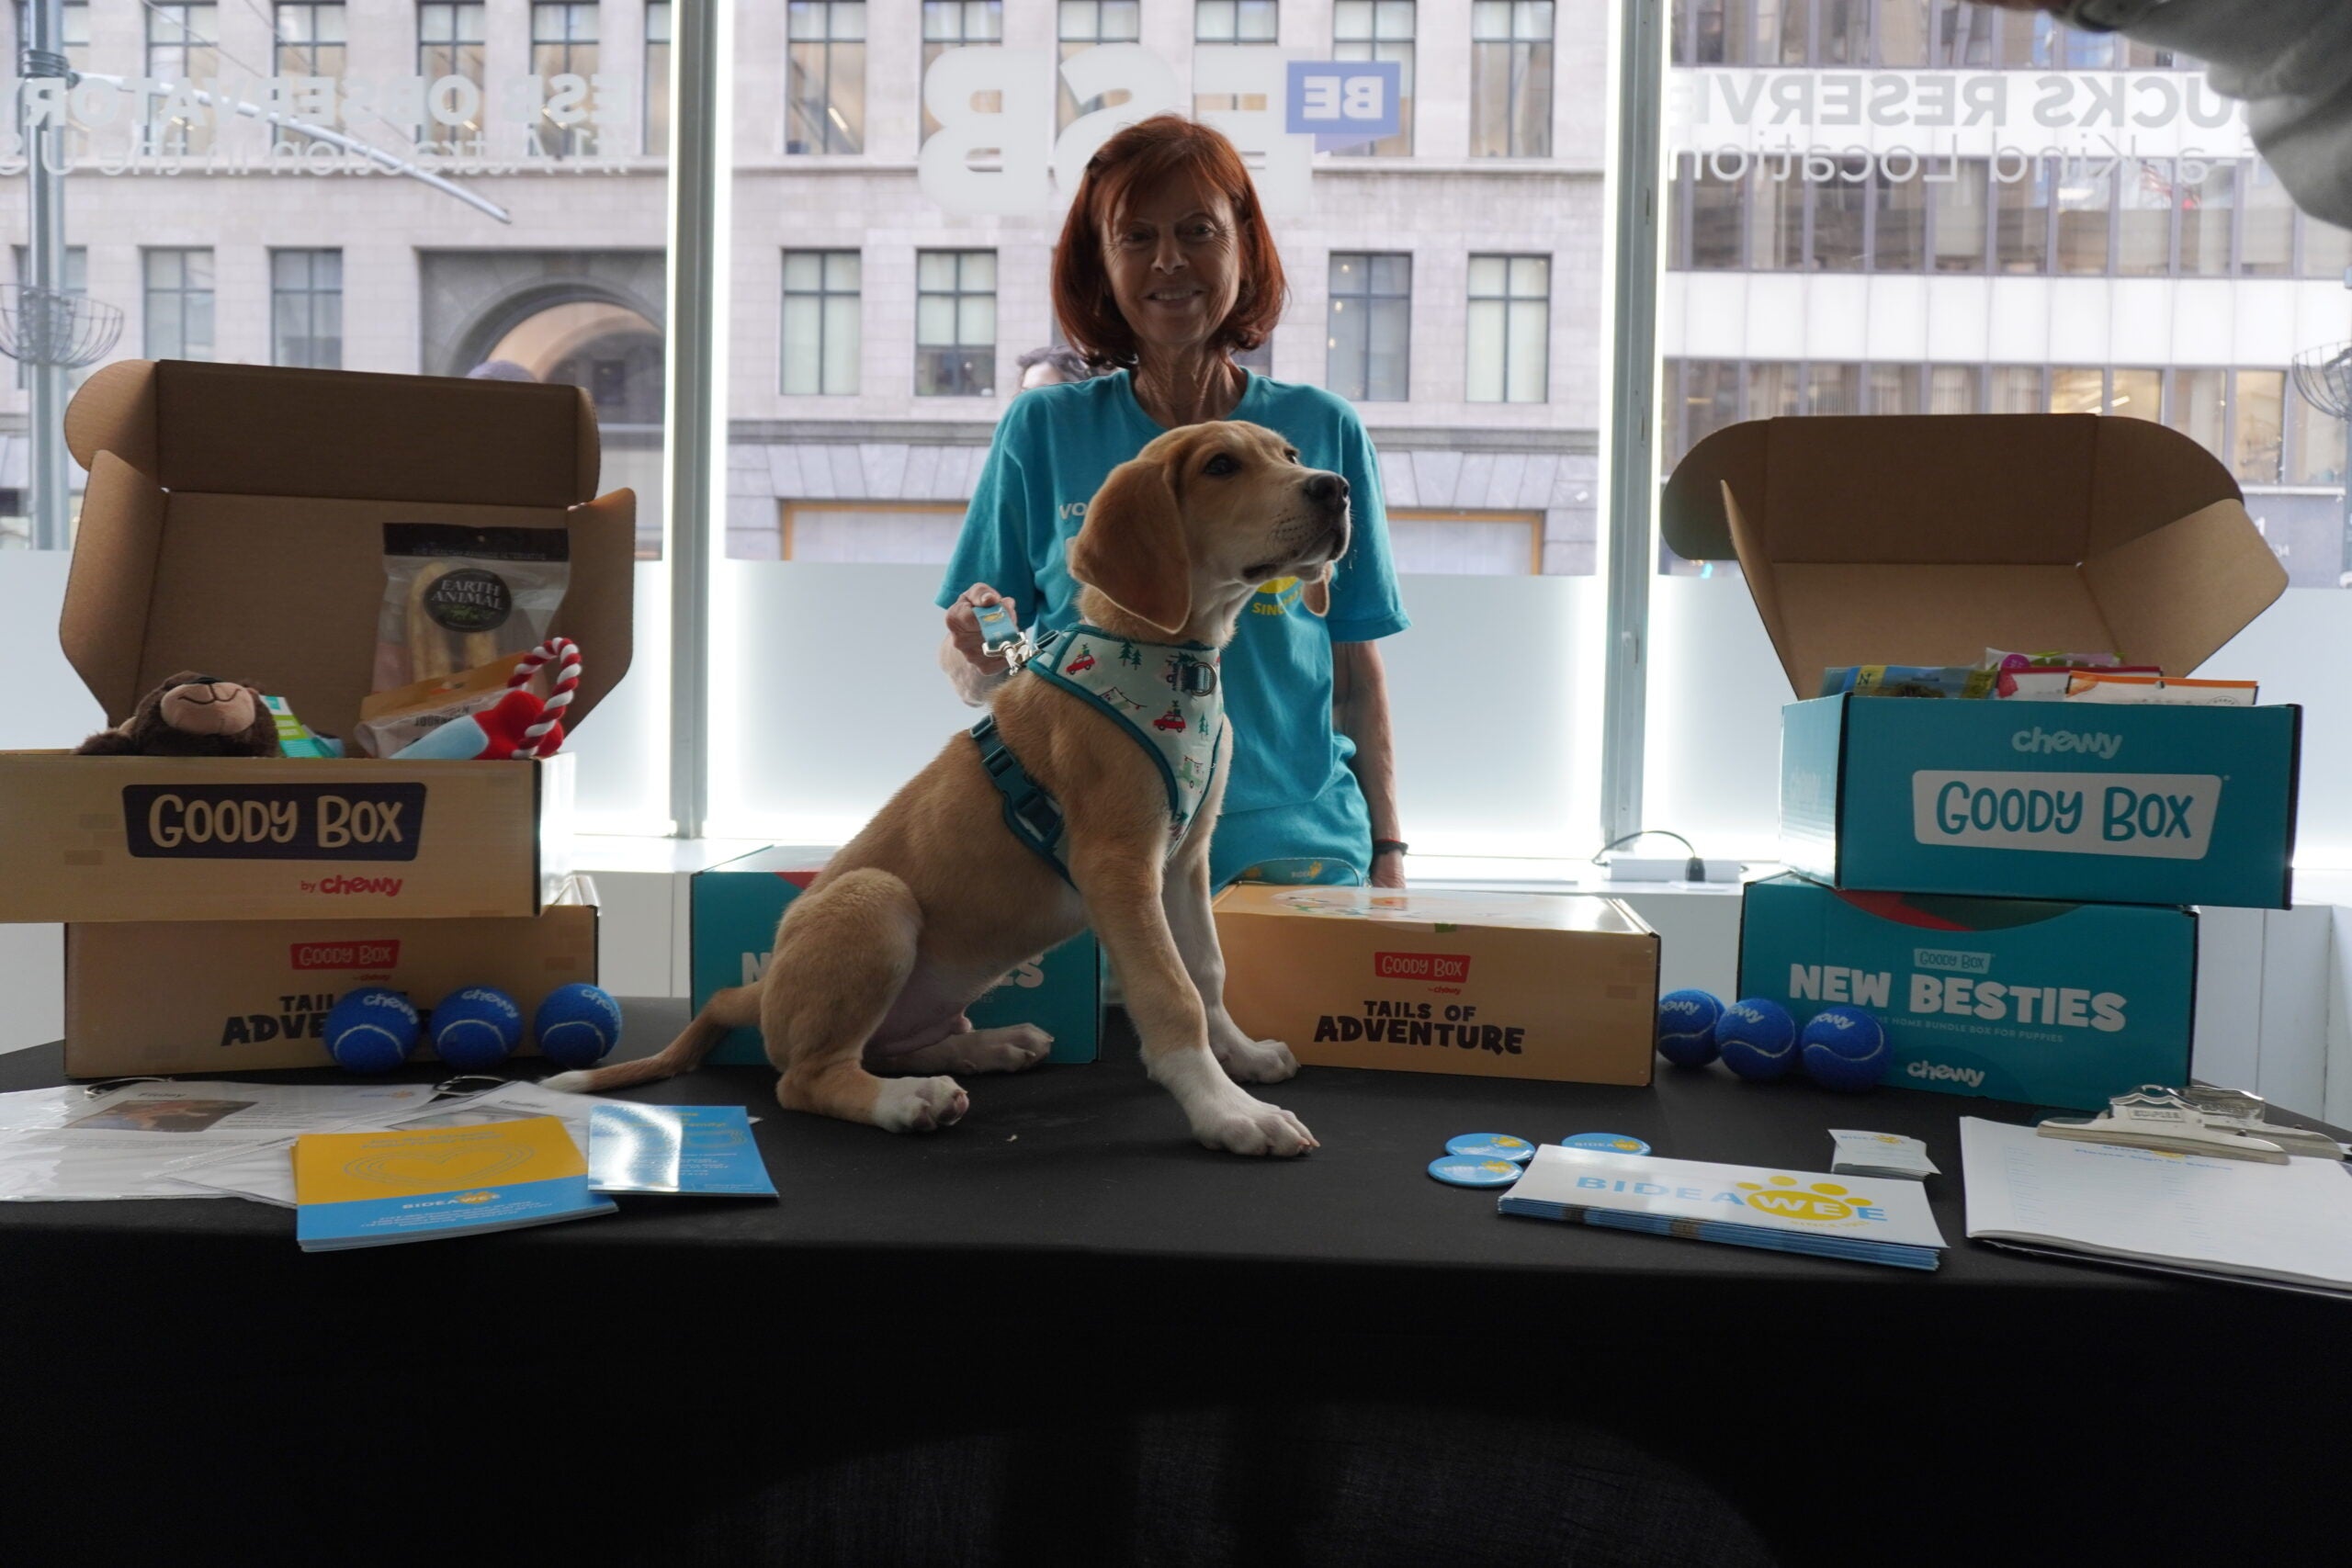 Observatory visits with pet for National Pet Day at Empire State Building